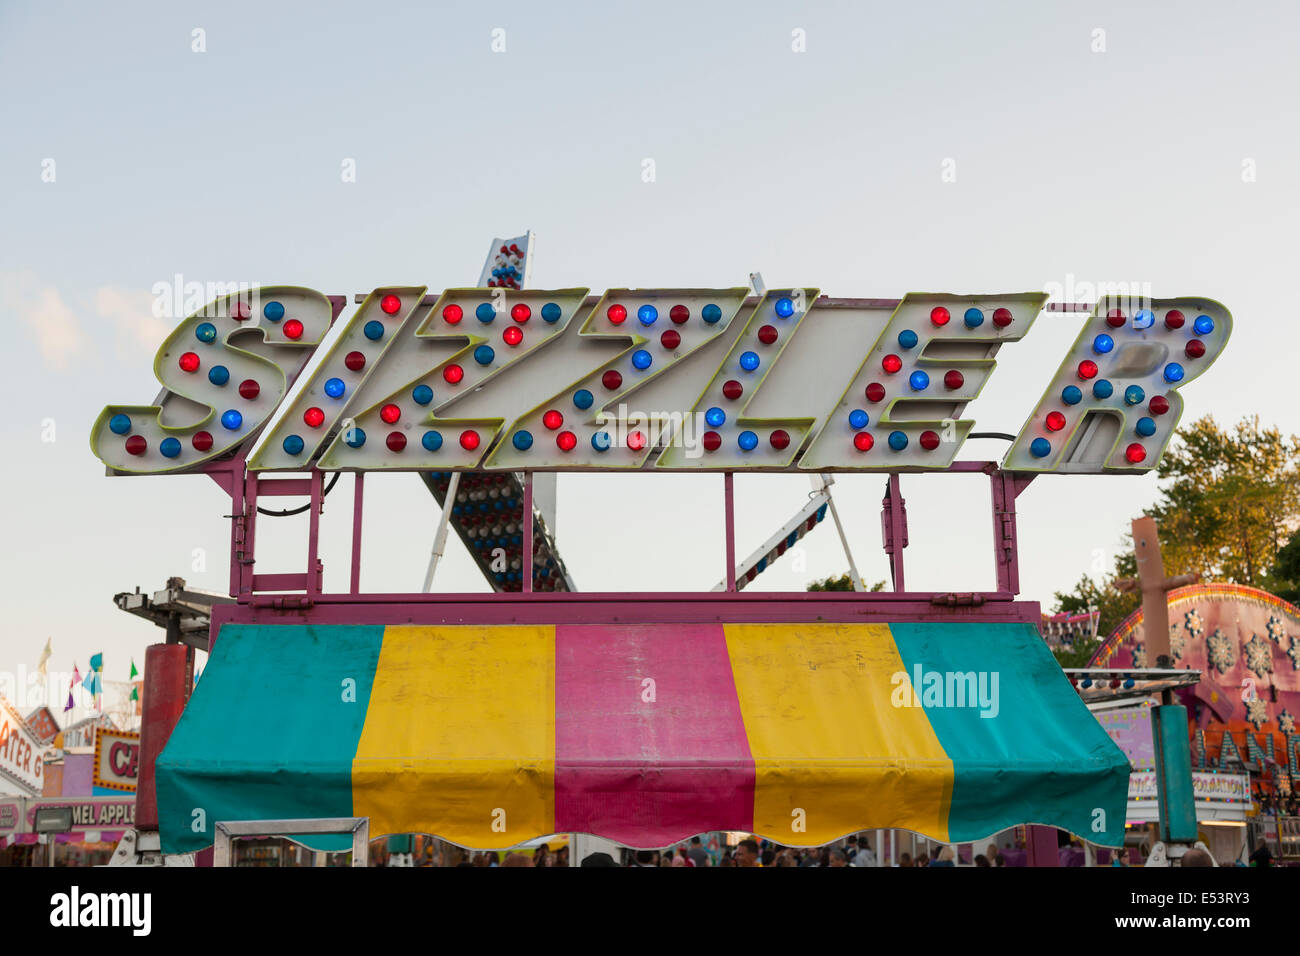 Signage for a ride called 'Sizzler' at the 'Sound of Music Festival' at Spencer Smith Park in Burlington, Ontario, Canada. Stock Photo